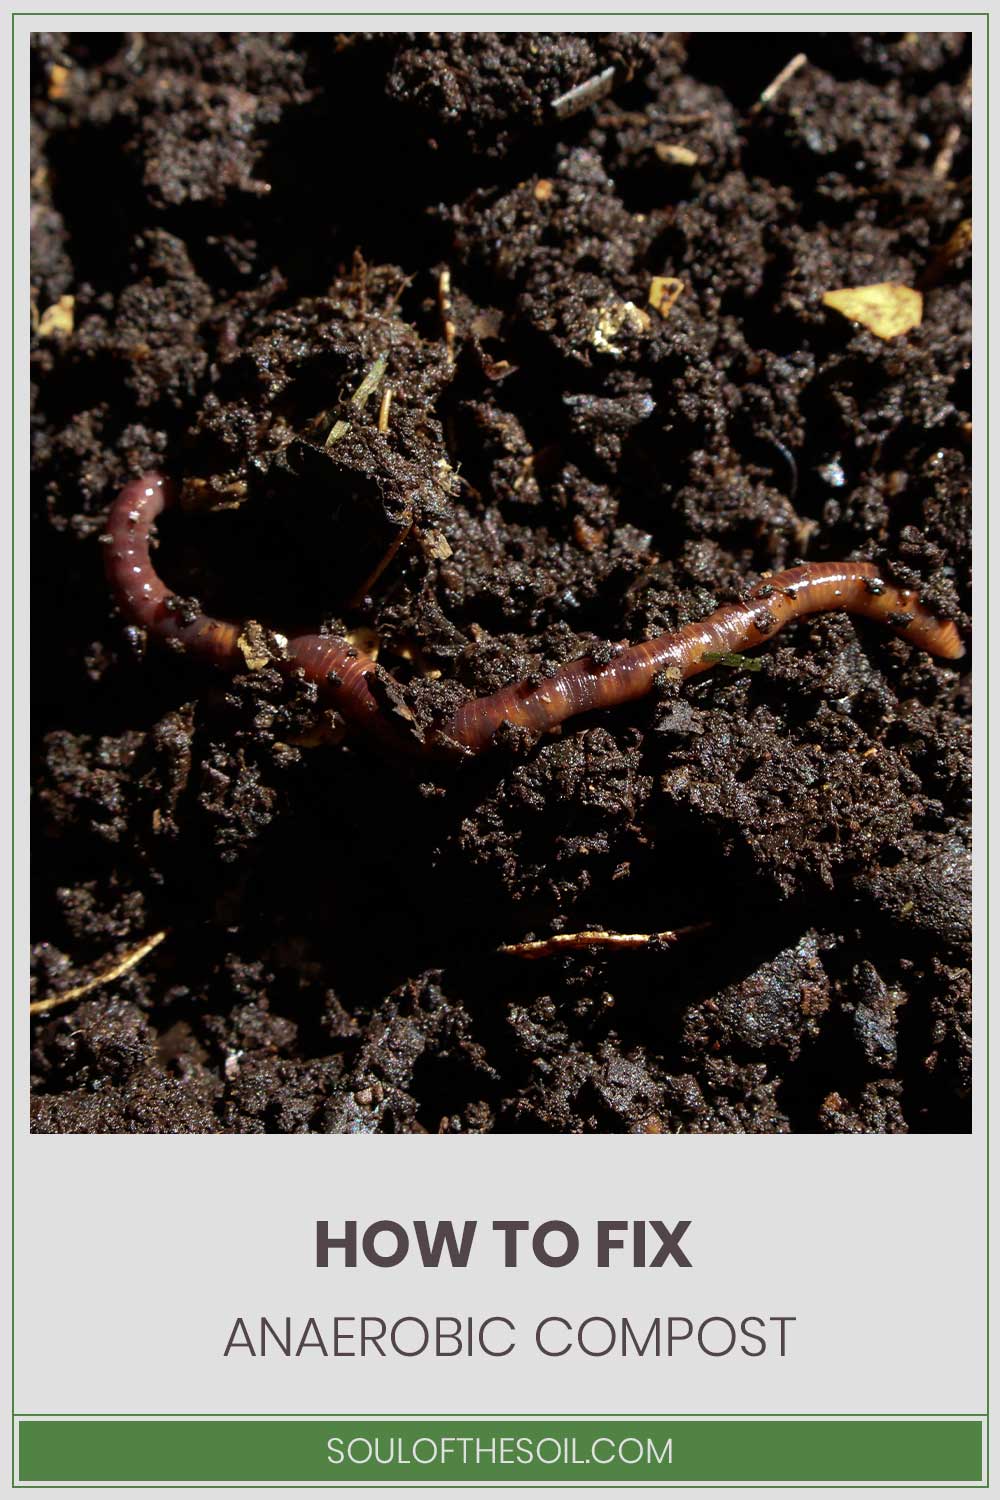 A worm in moist clay - How to Fix Anaerobic Compost?